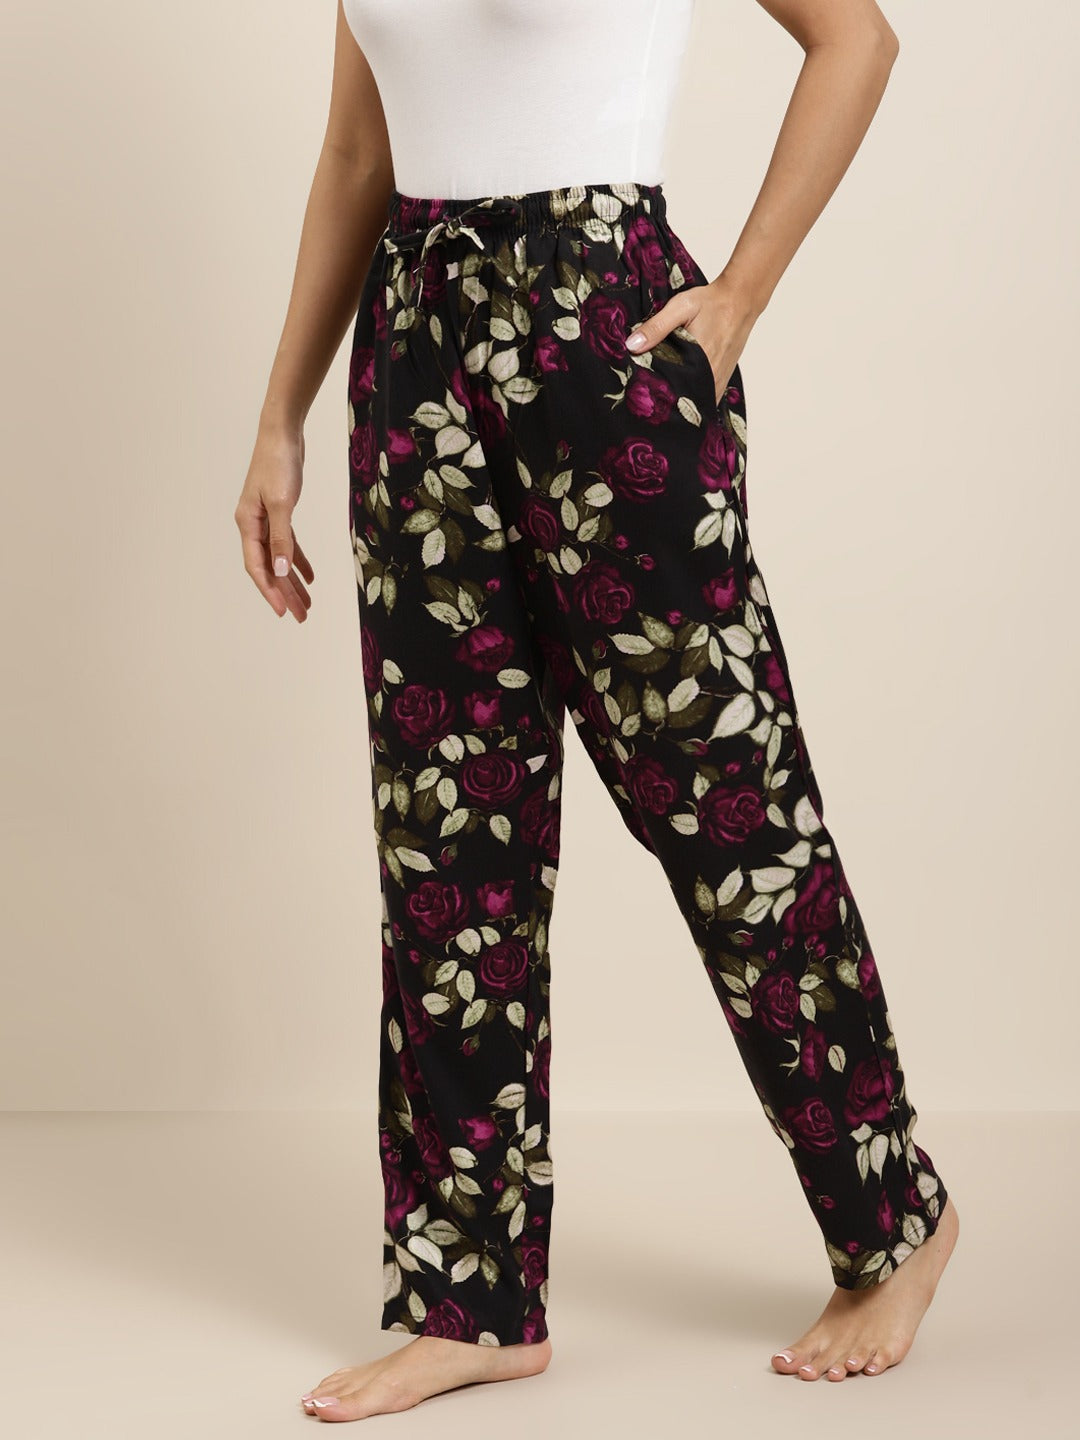 Women Black-Pink Prints Viscose Rayon Relaxed Fit Casual Lounge Pant